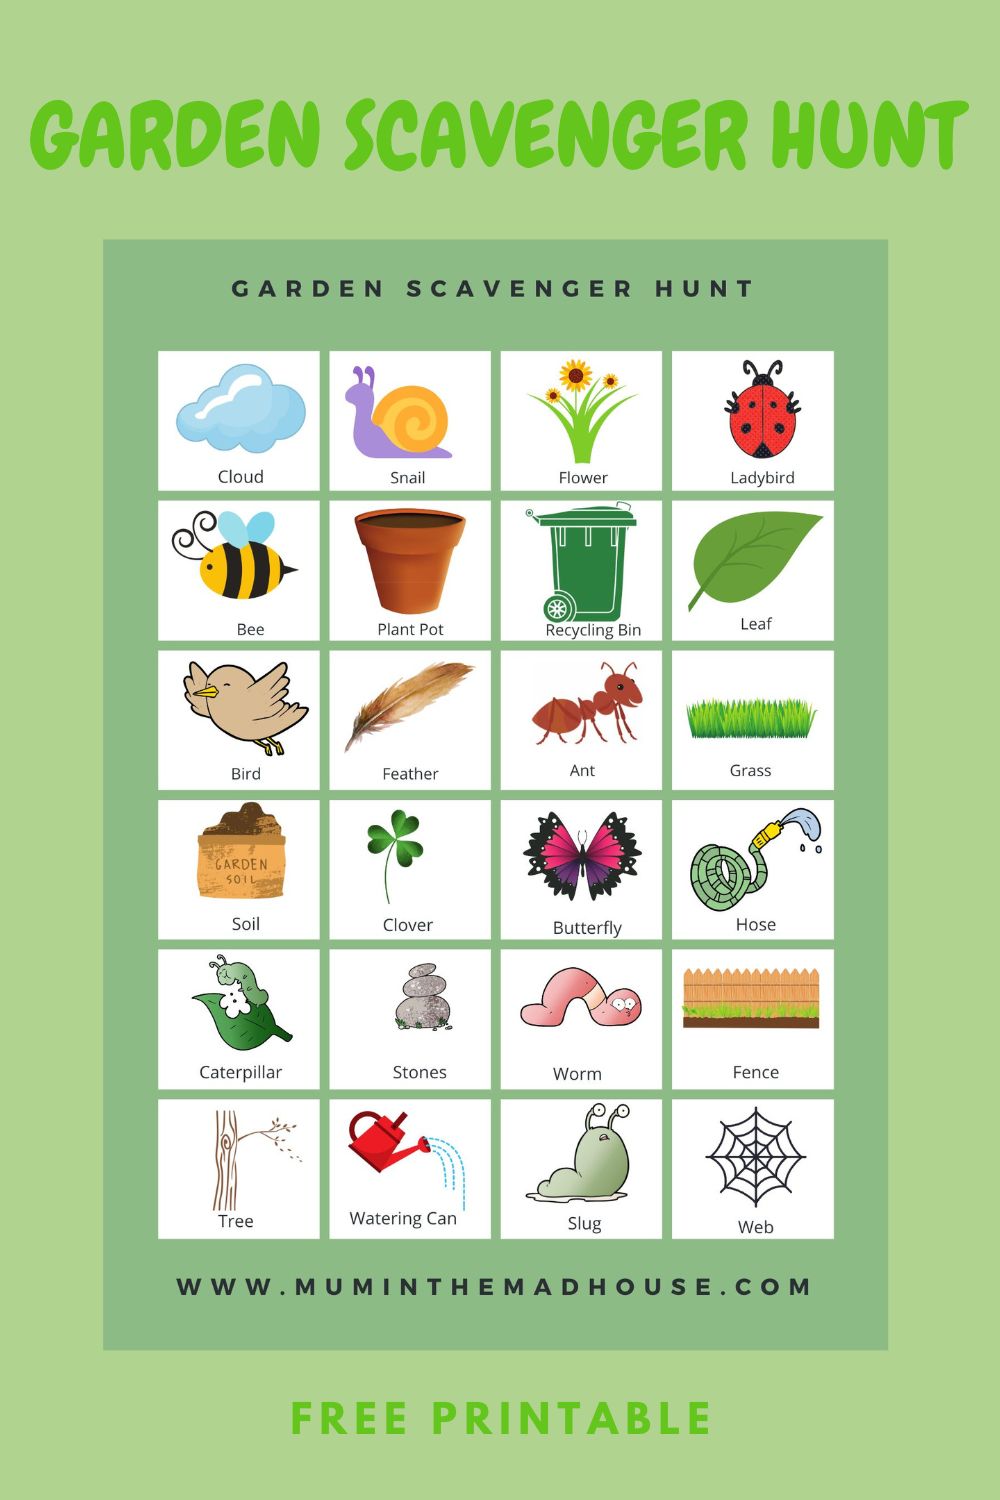 A back yard or garden scavenger hunt can be a fun way to encourage young gardeners to practice using their observation skills.